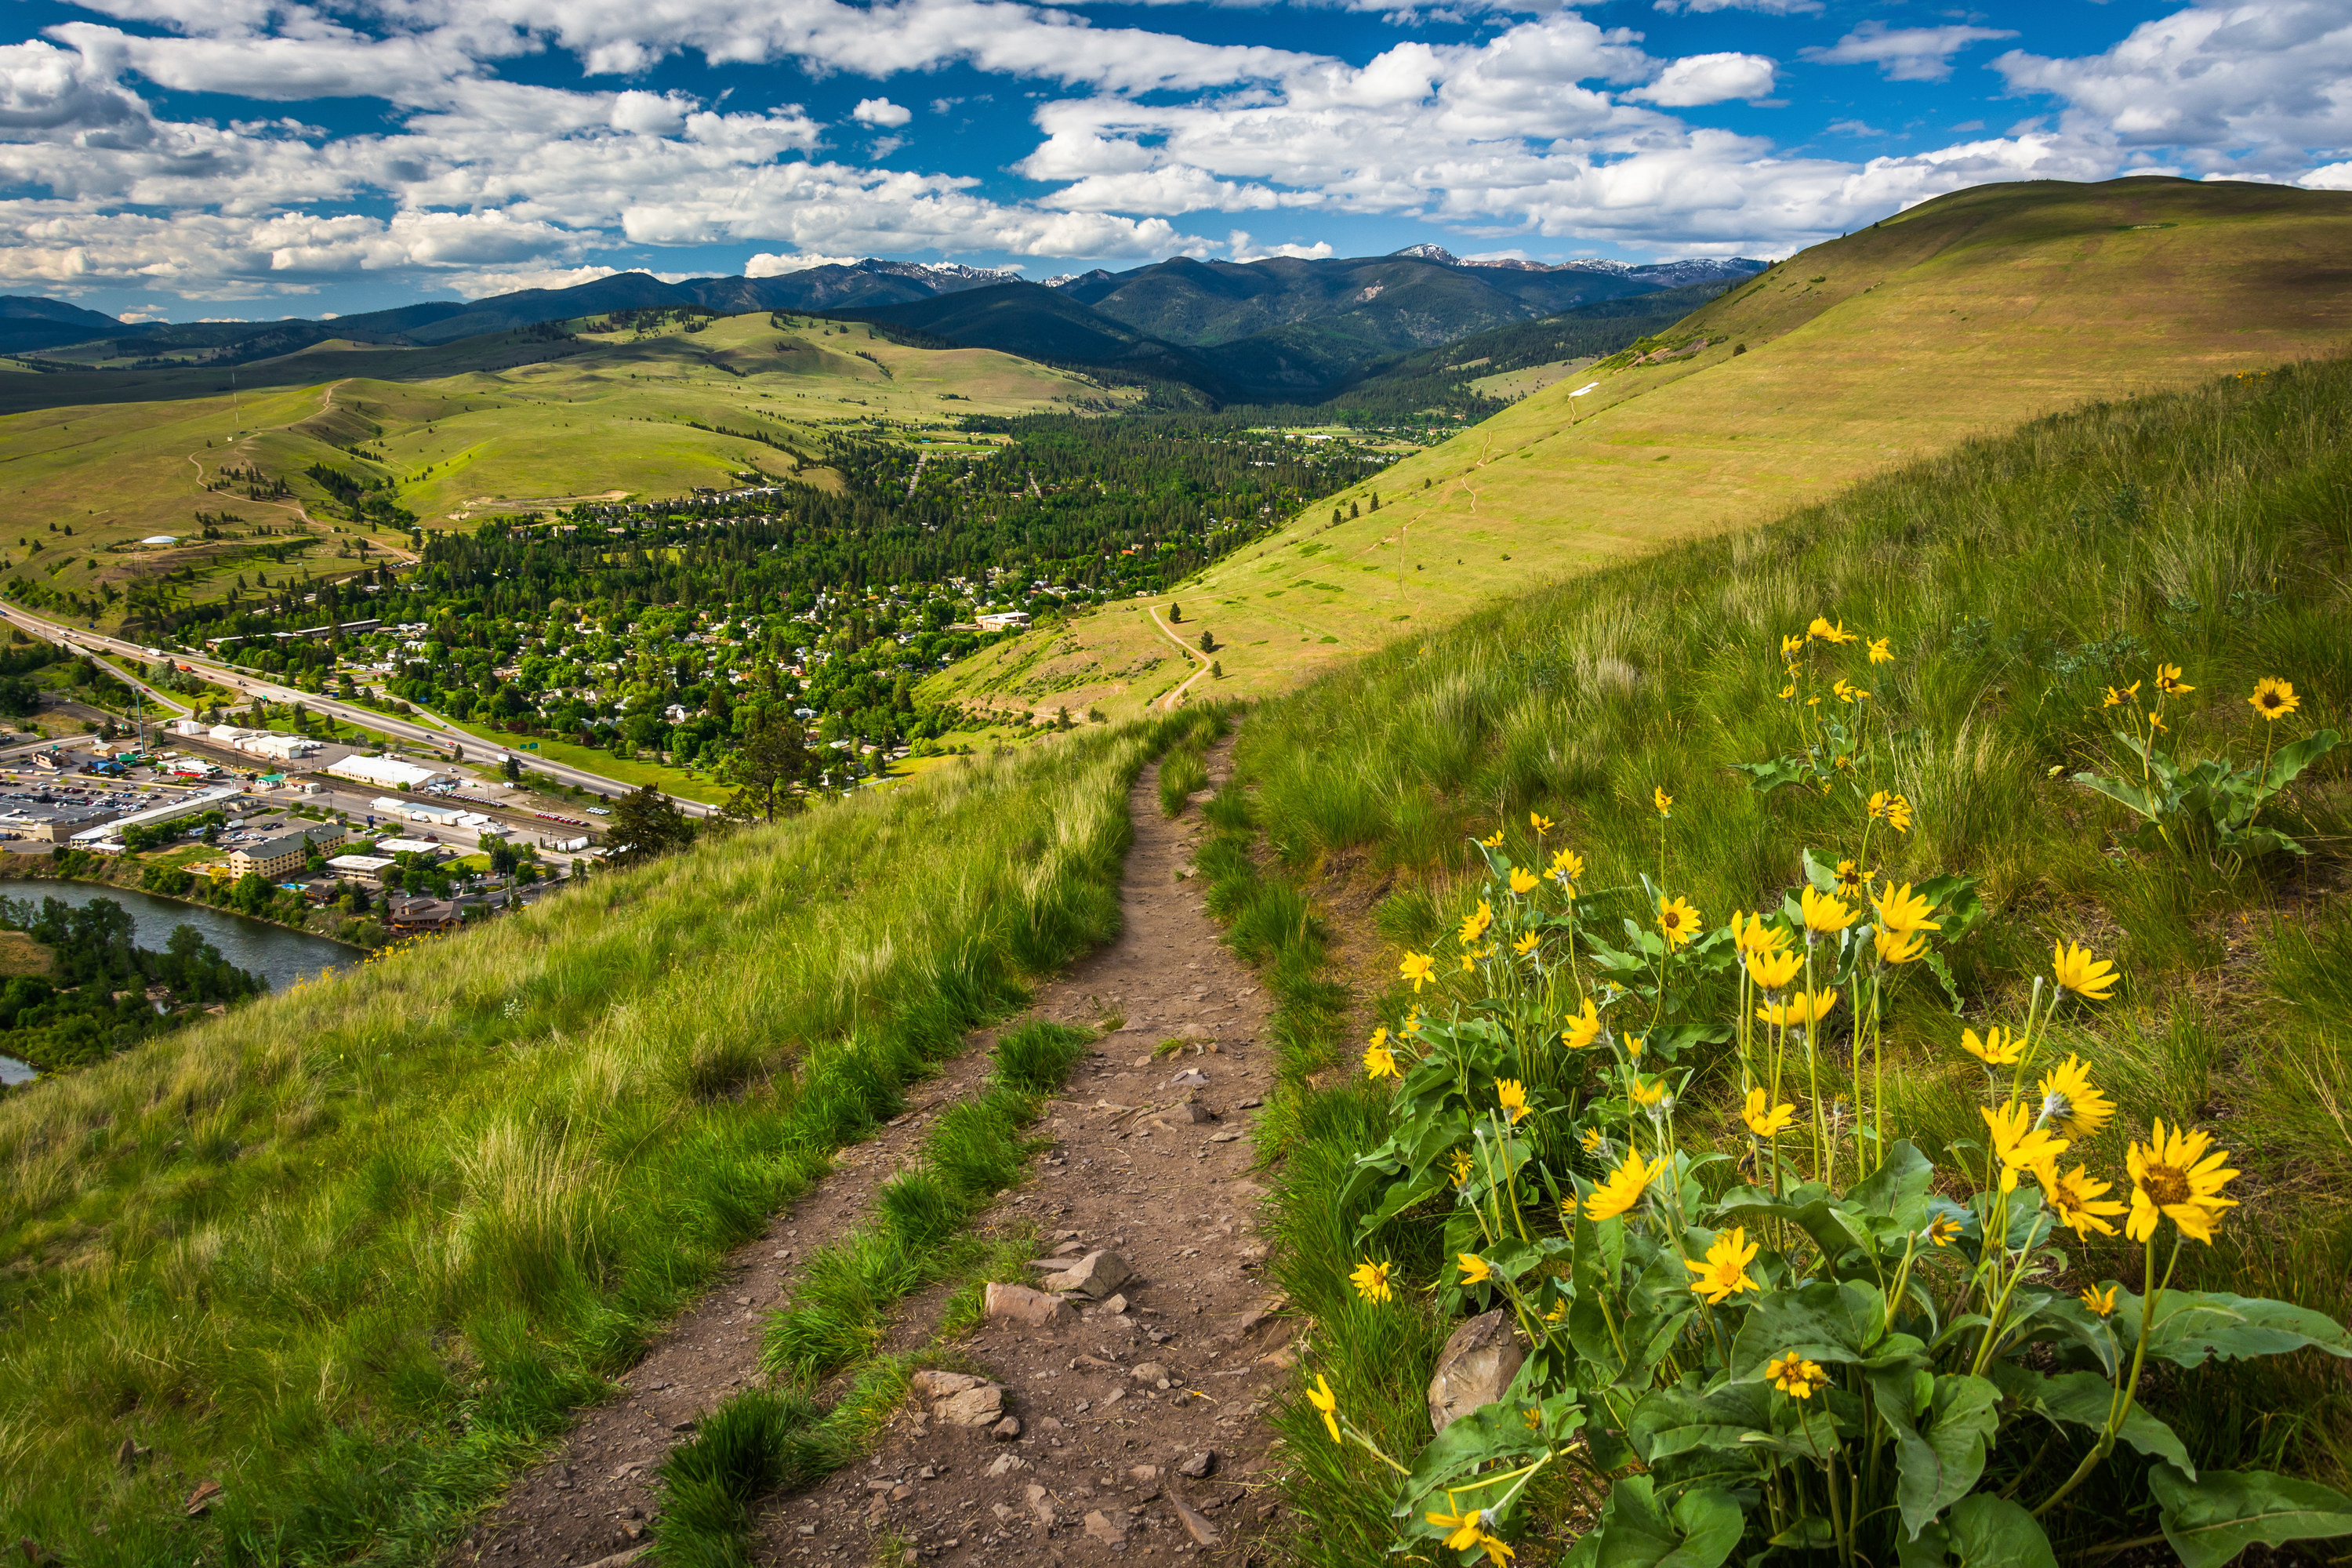 Overlooking Missoula from a hike through a grassy mountain nearby, lined with wildflowers